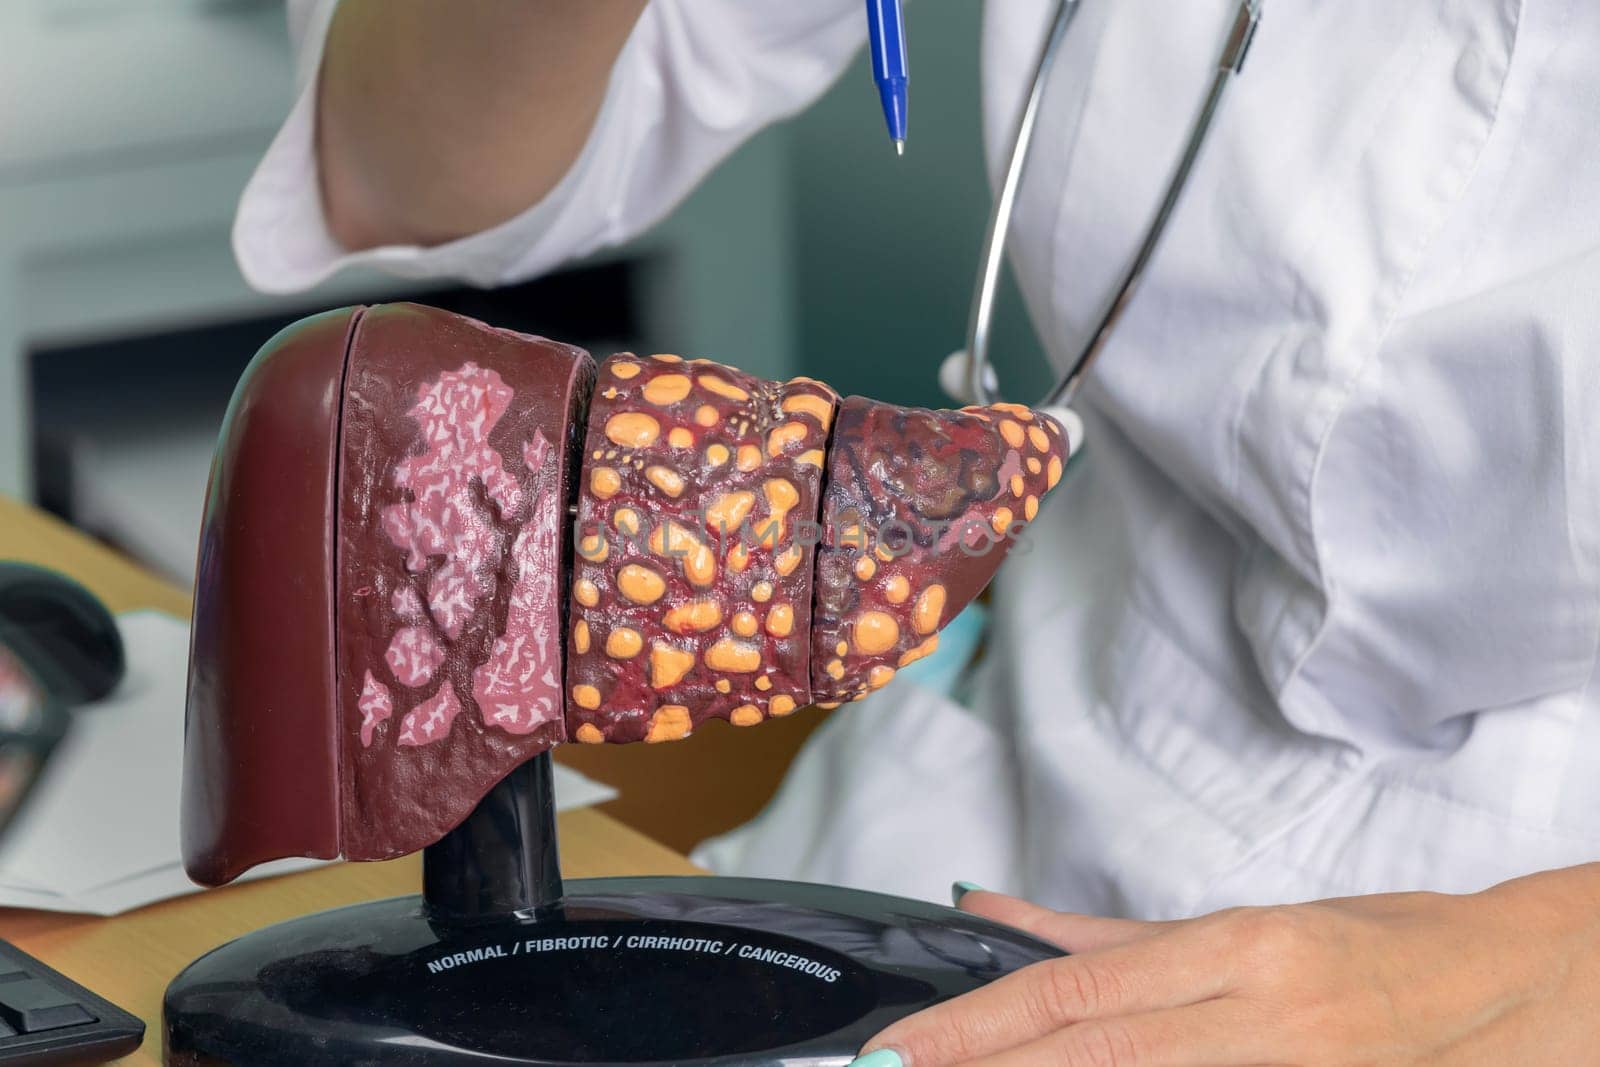 Close up of model of a human liver with the words normal, fibrotic, cirrhotic, cancerous. a female doctor shows the patient a stage 4 liver: normal, fibrous, cirrhotic, malignant. The liver means your health and your life.